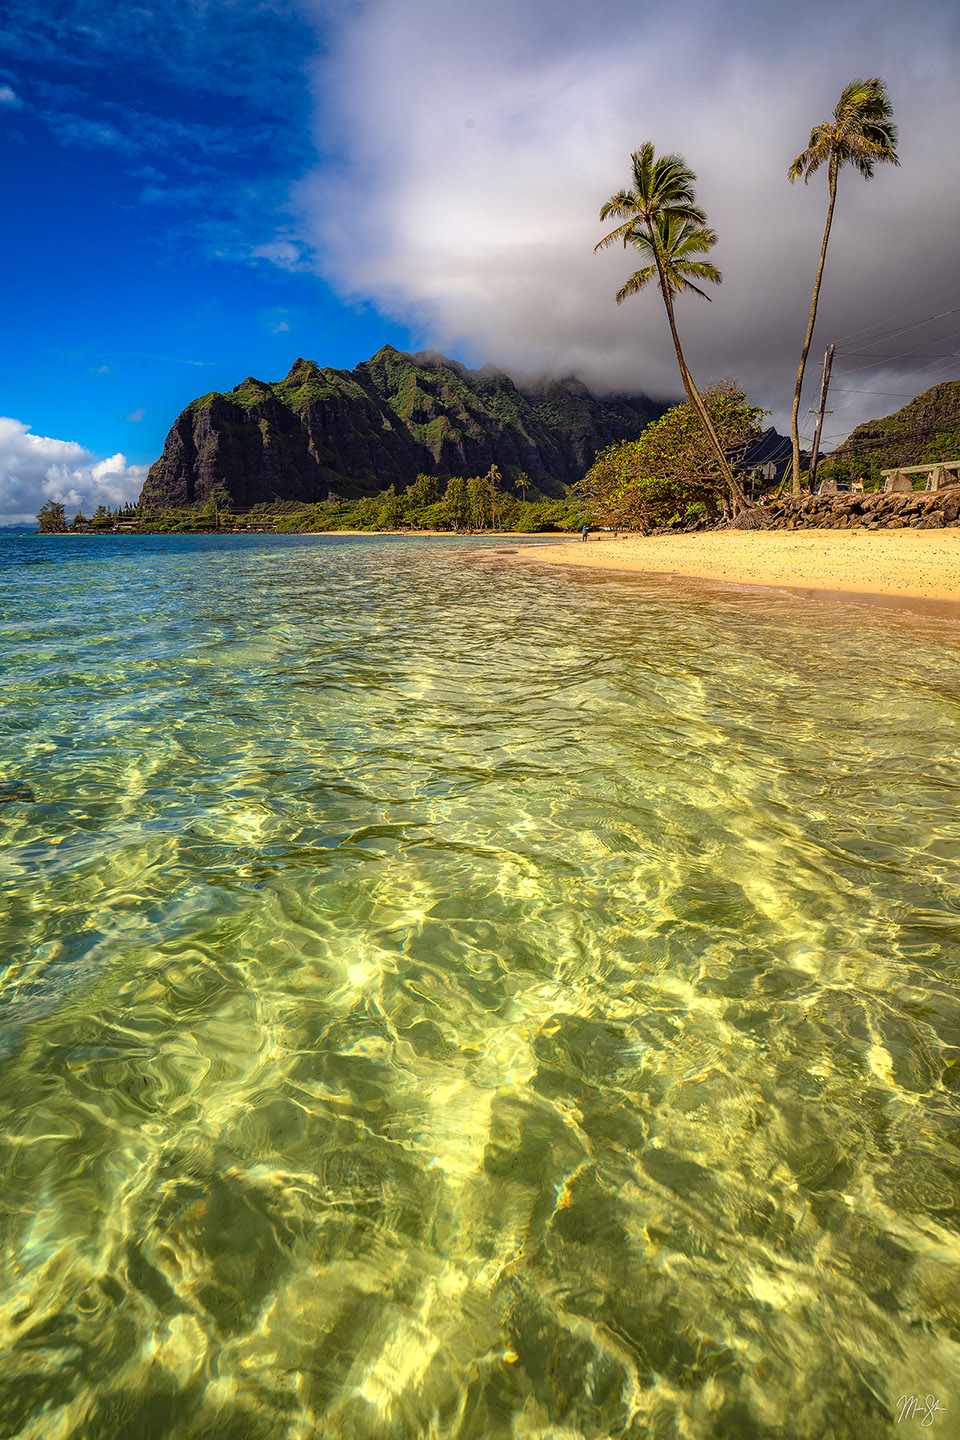 Crystal clear waters with the Kualoa ranch mountains in the background